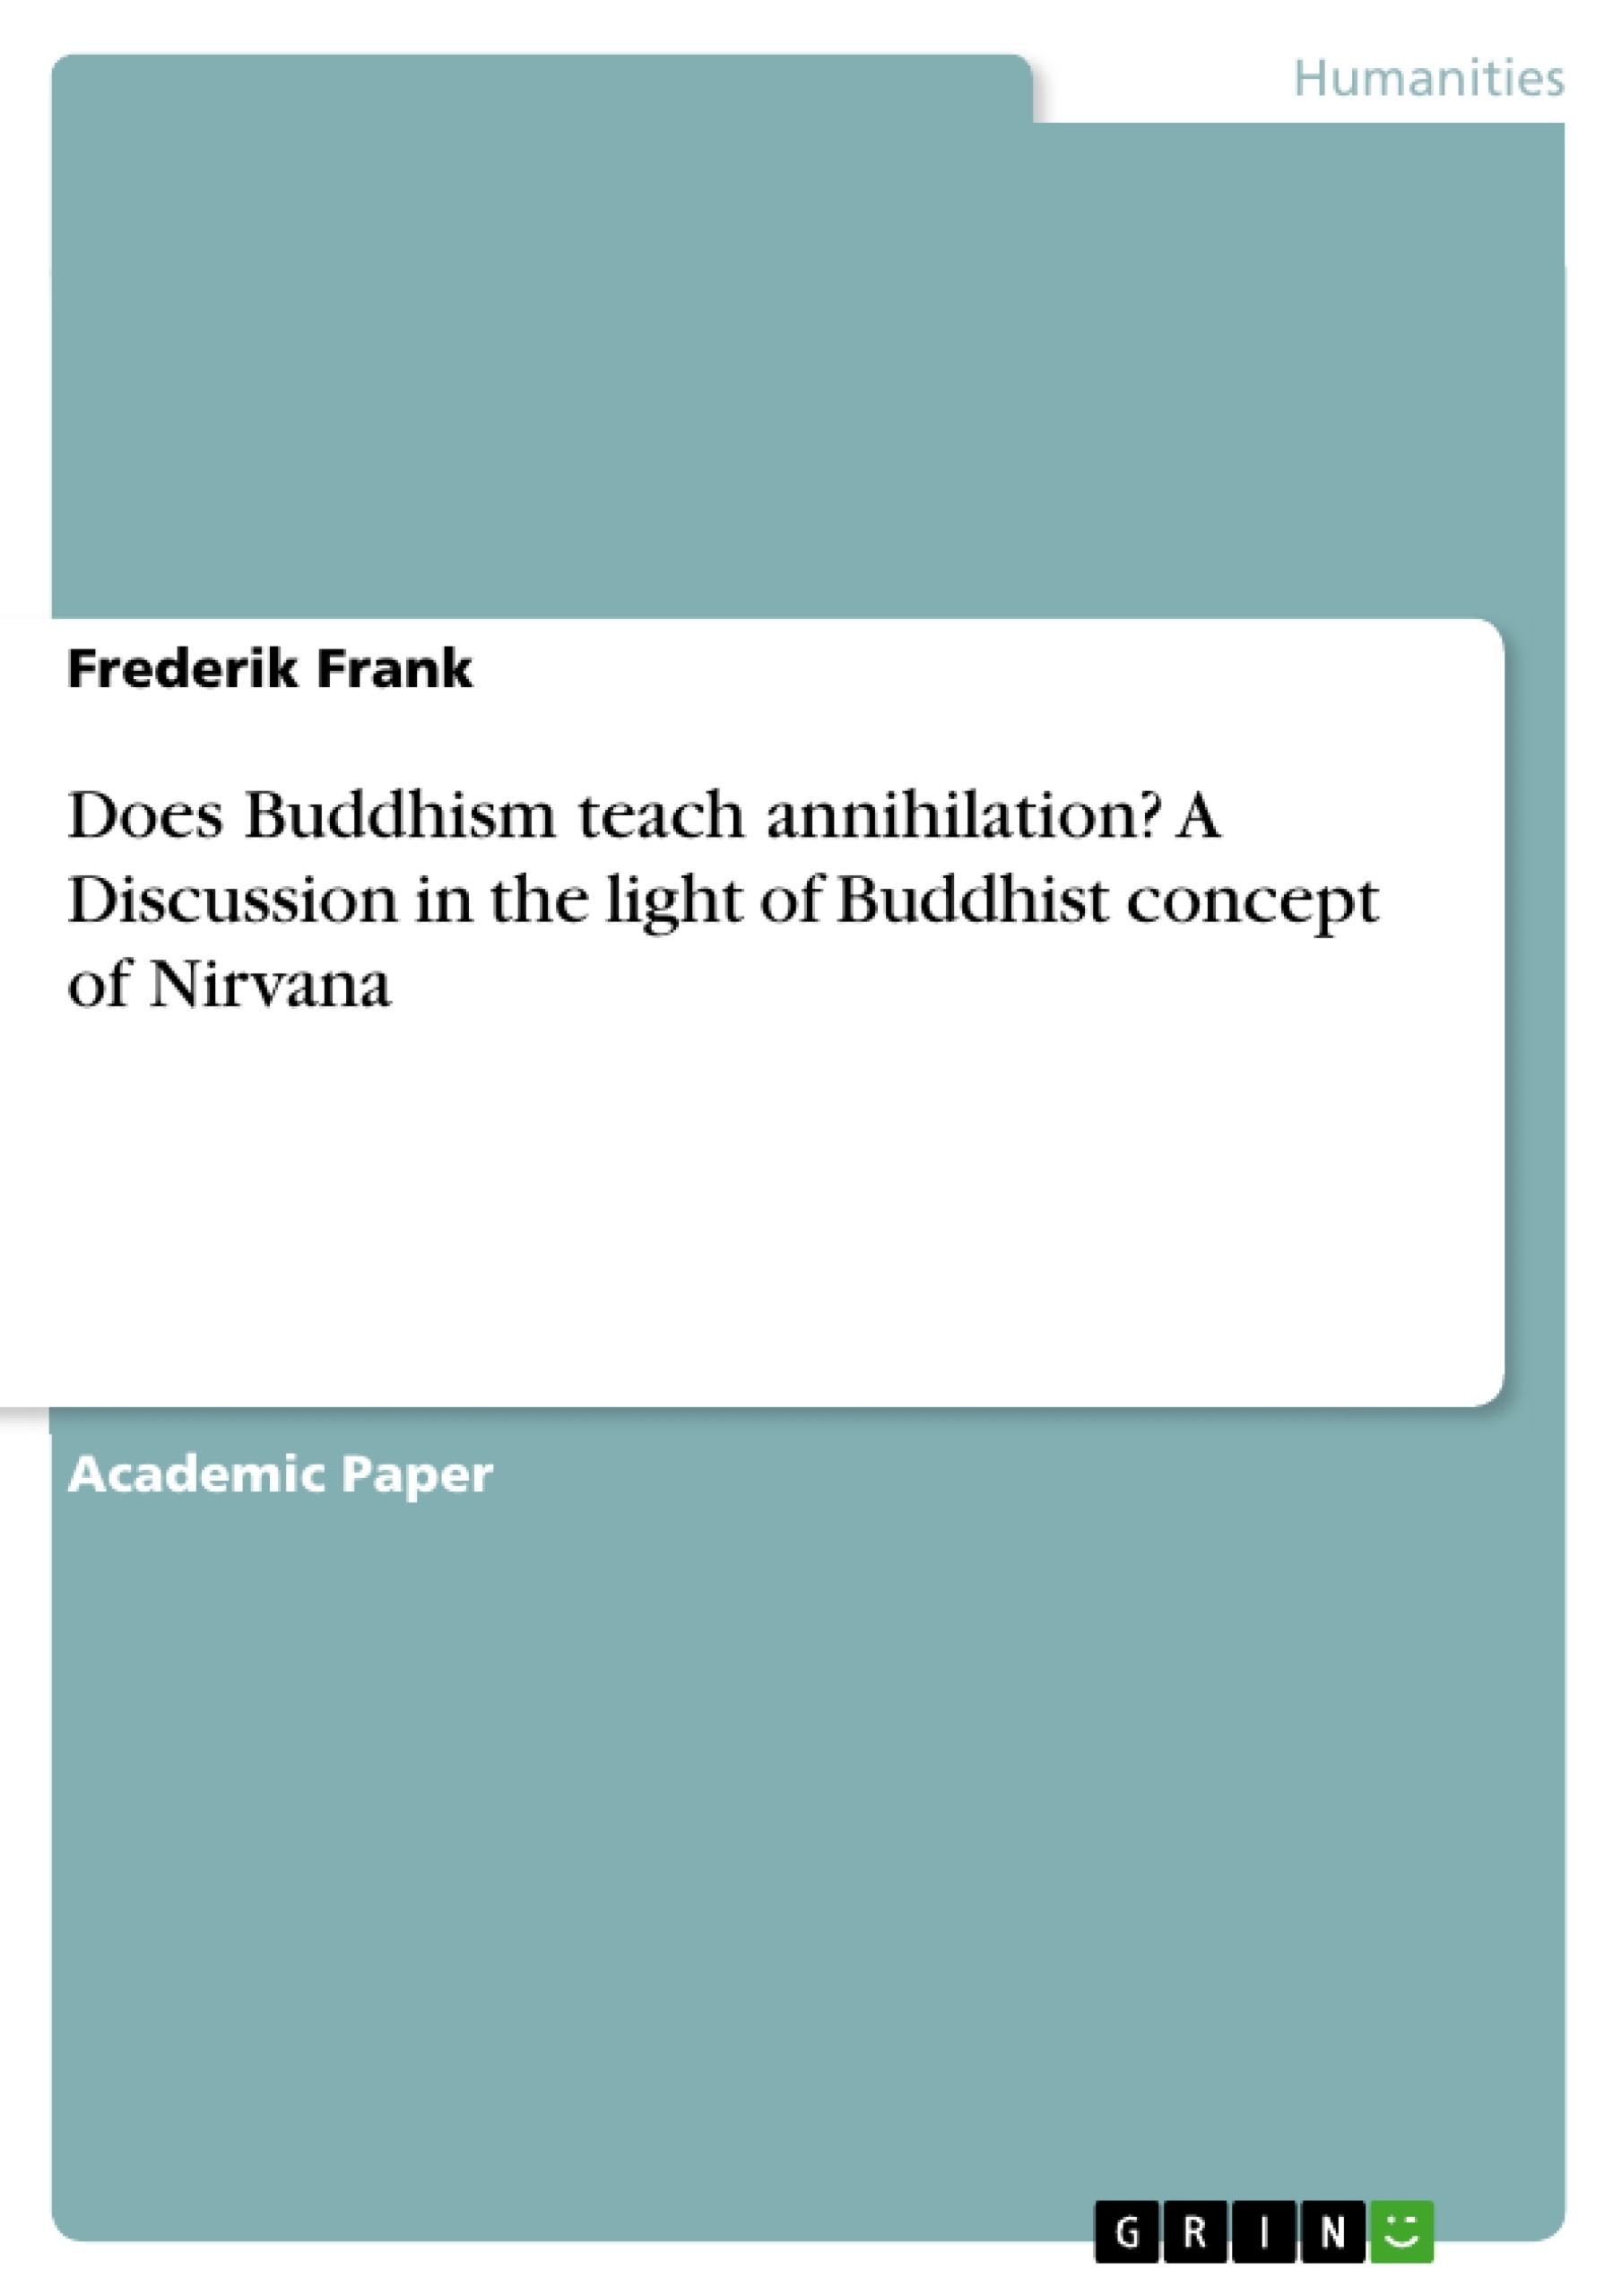 Título: Does Buddhism teach annihilation? A Discussion in the light of Buddhist concept of Nirvana